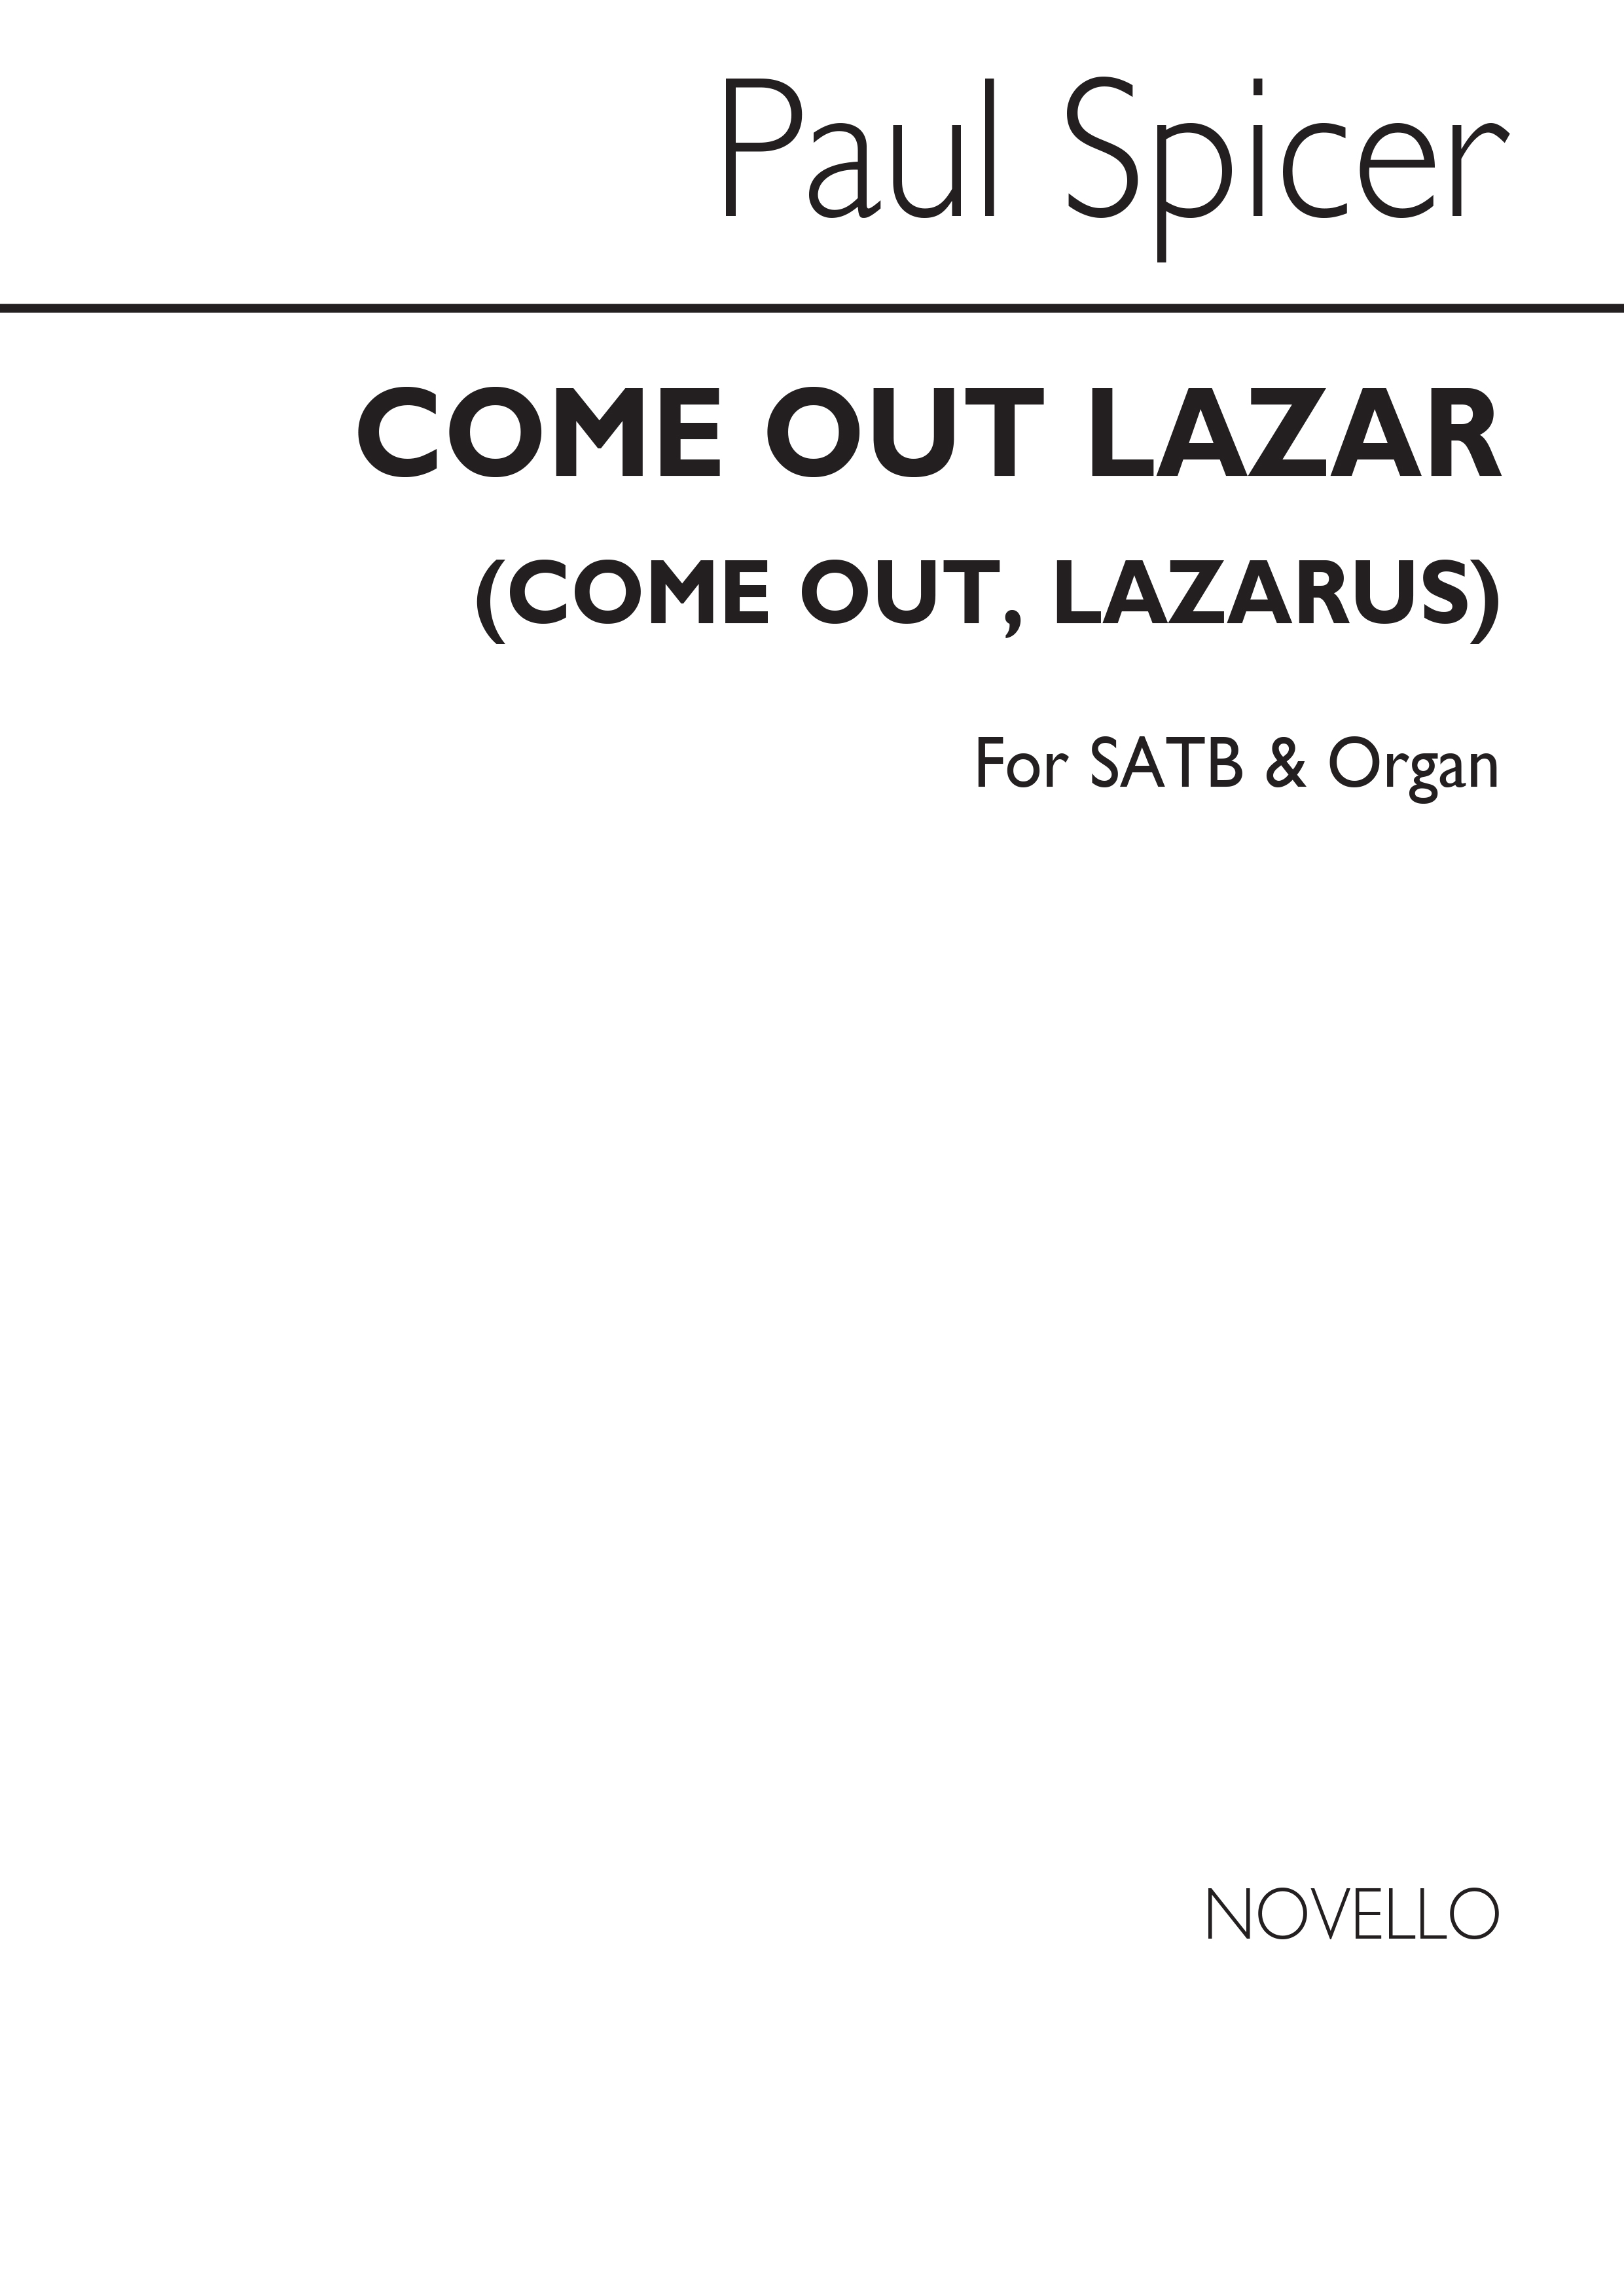 Paul Spicer: Come Out, Lazar